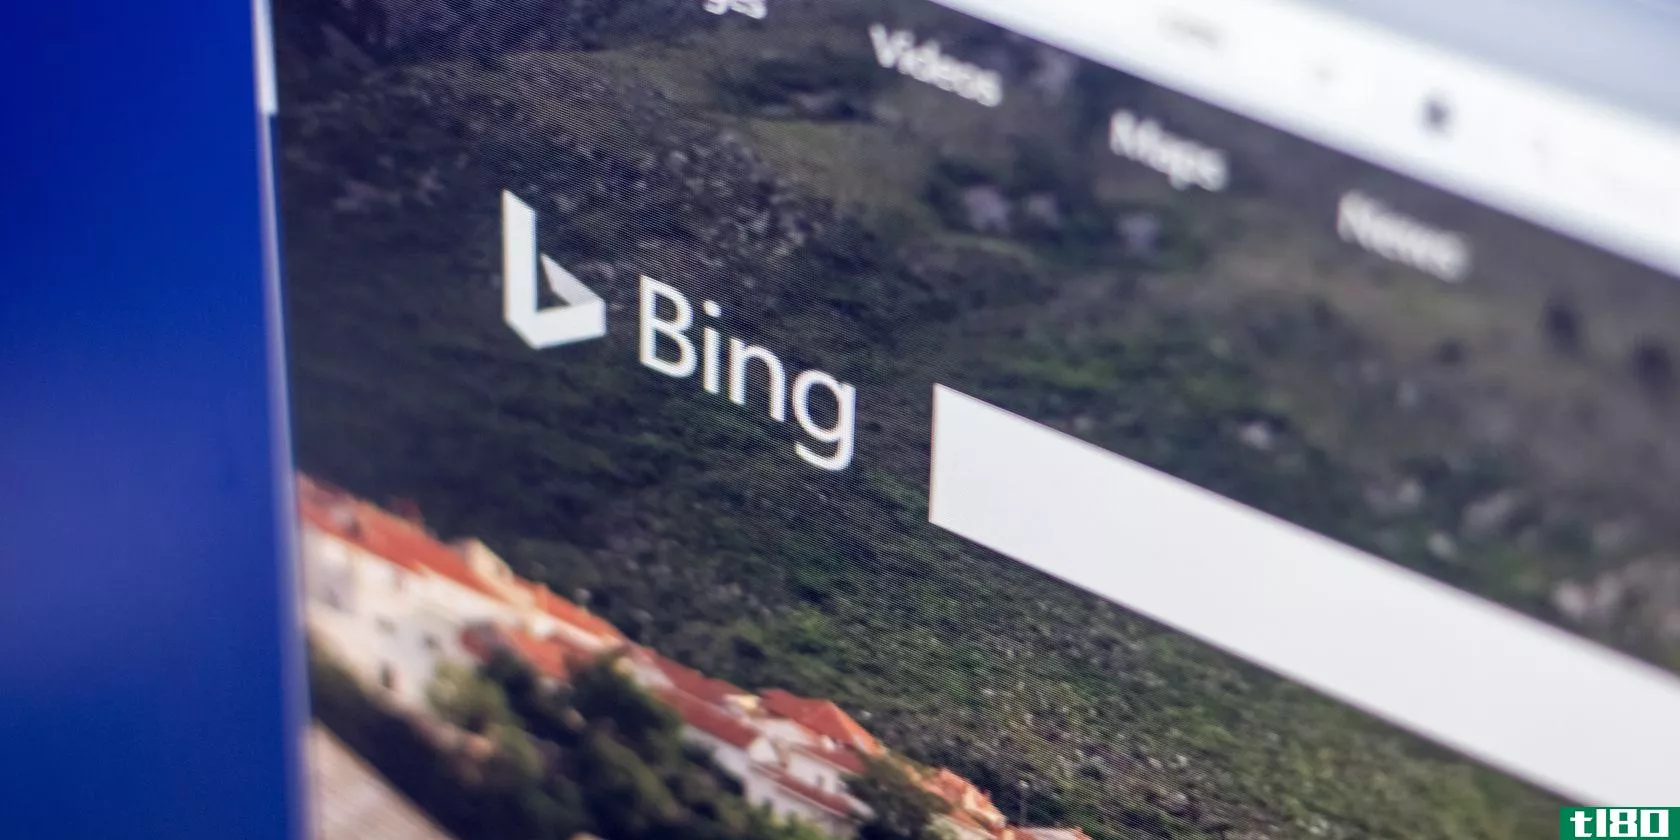 The Bing search engine